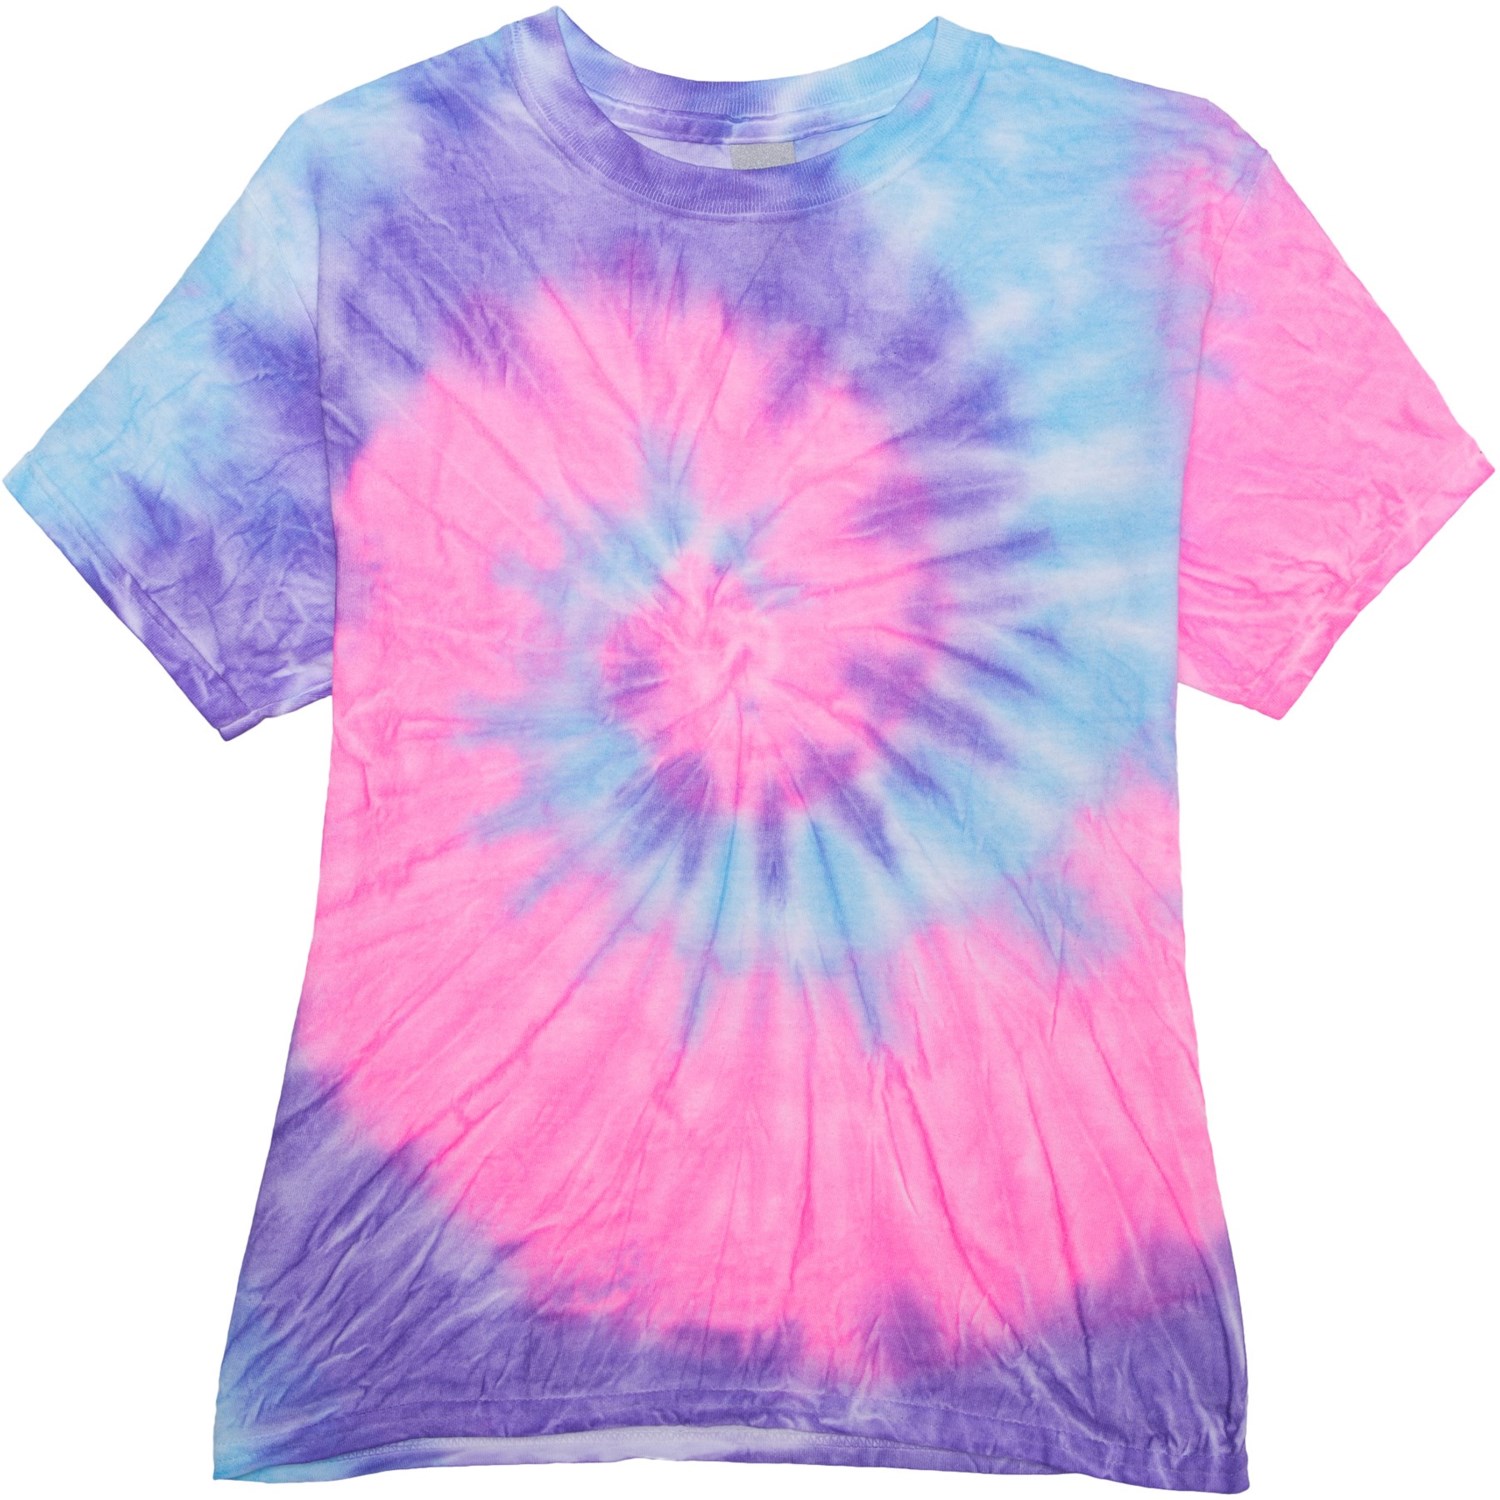 Exist Tie-Dye T- Shirt (For Big Girls) - Save 50%